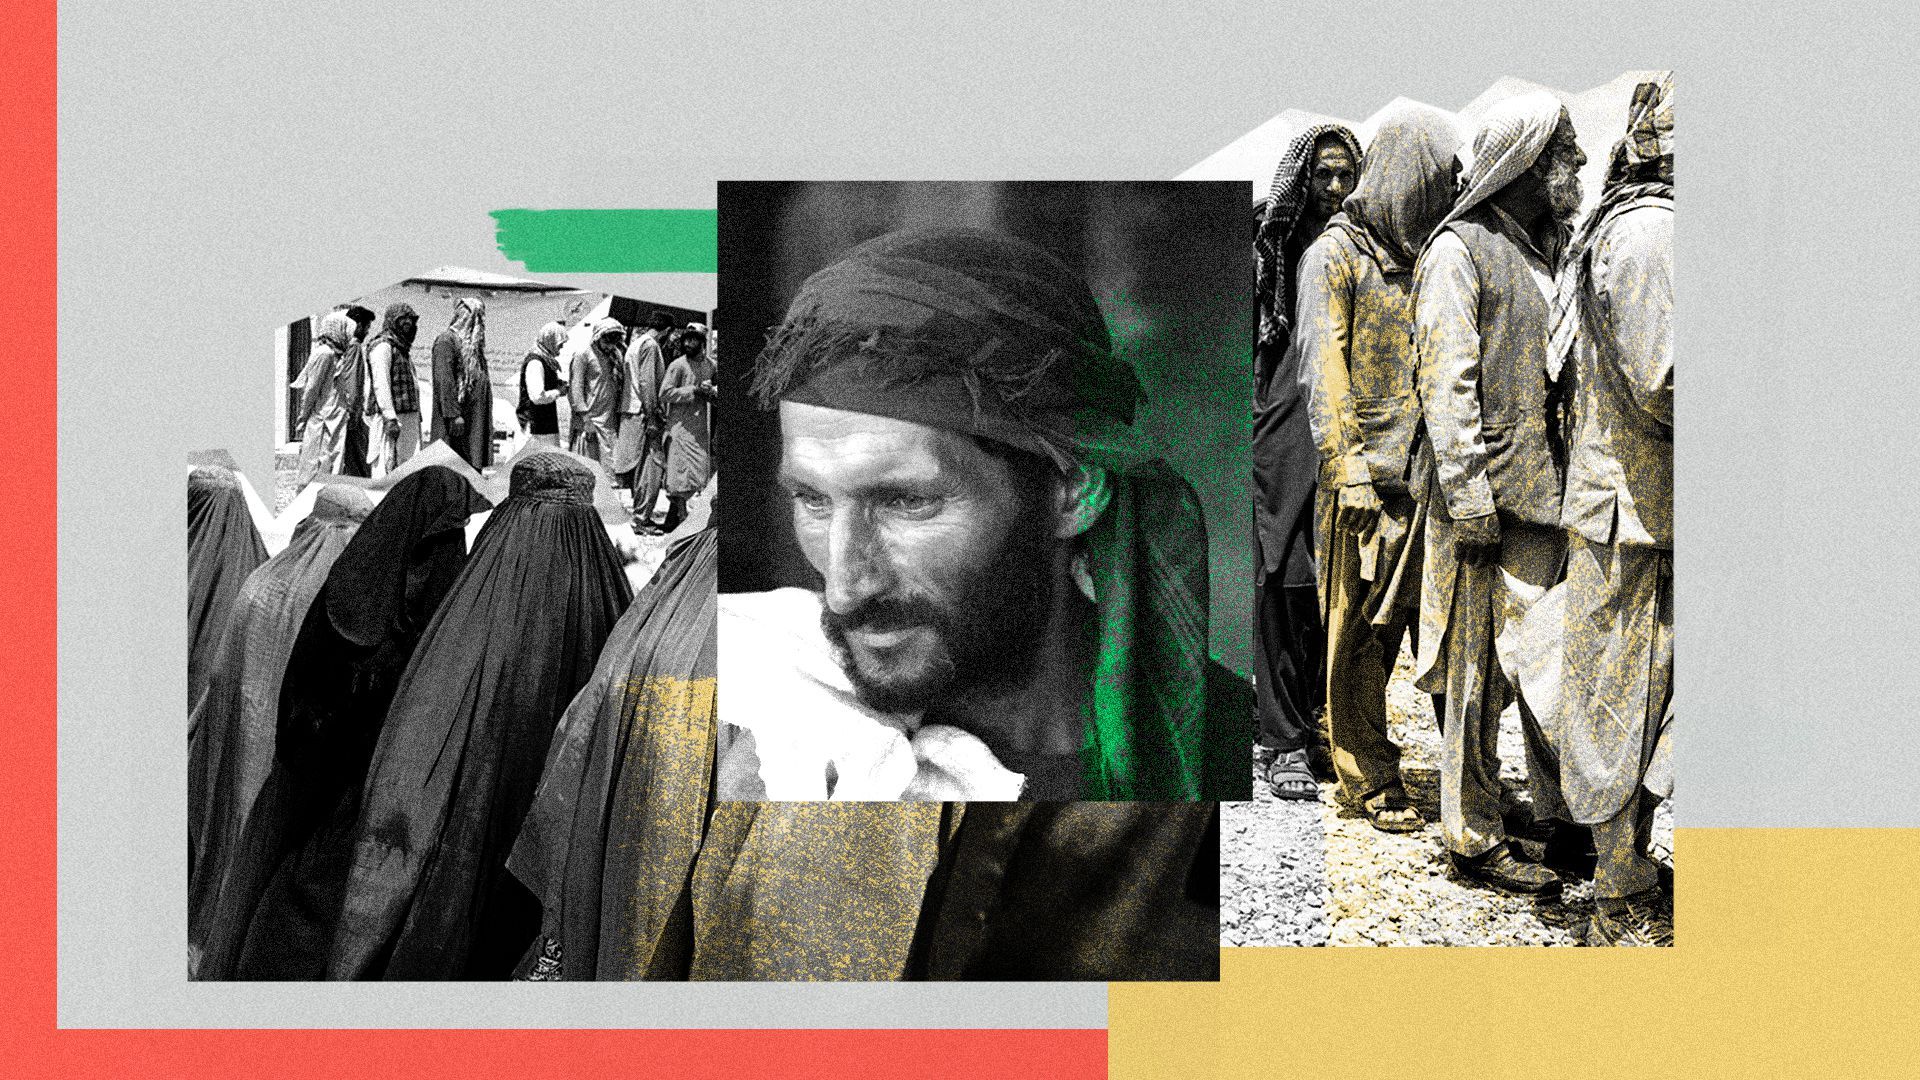 Photo illustration of displaced Afghani men and women refugees waiting in line, with an Afghani man in the cetner